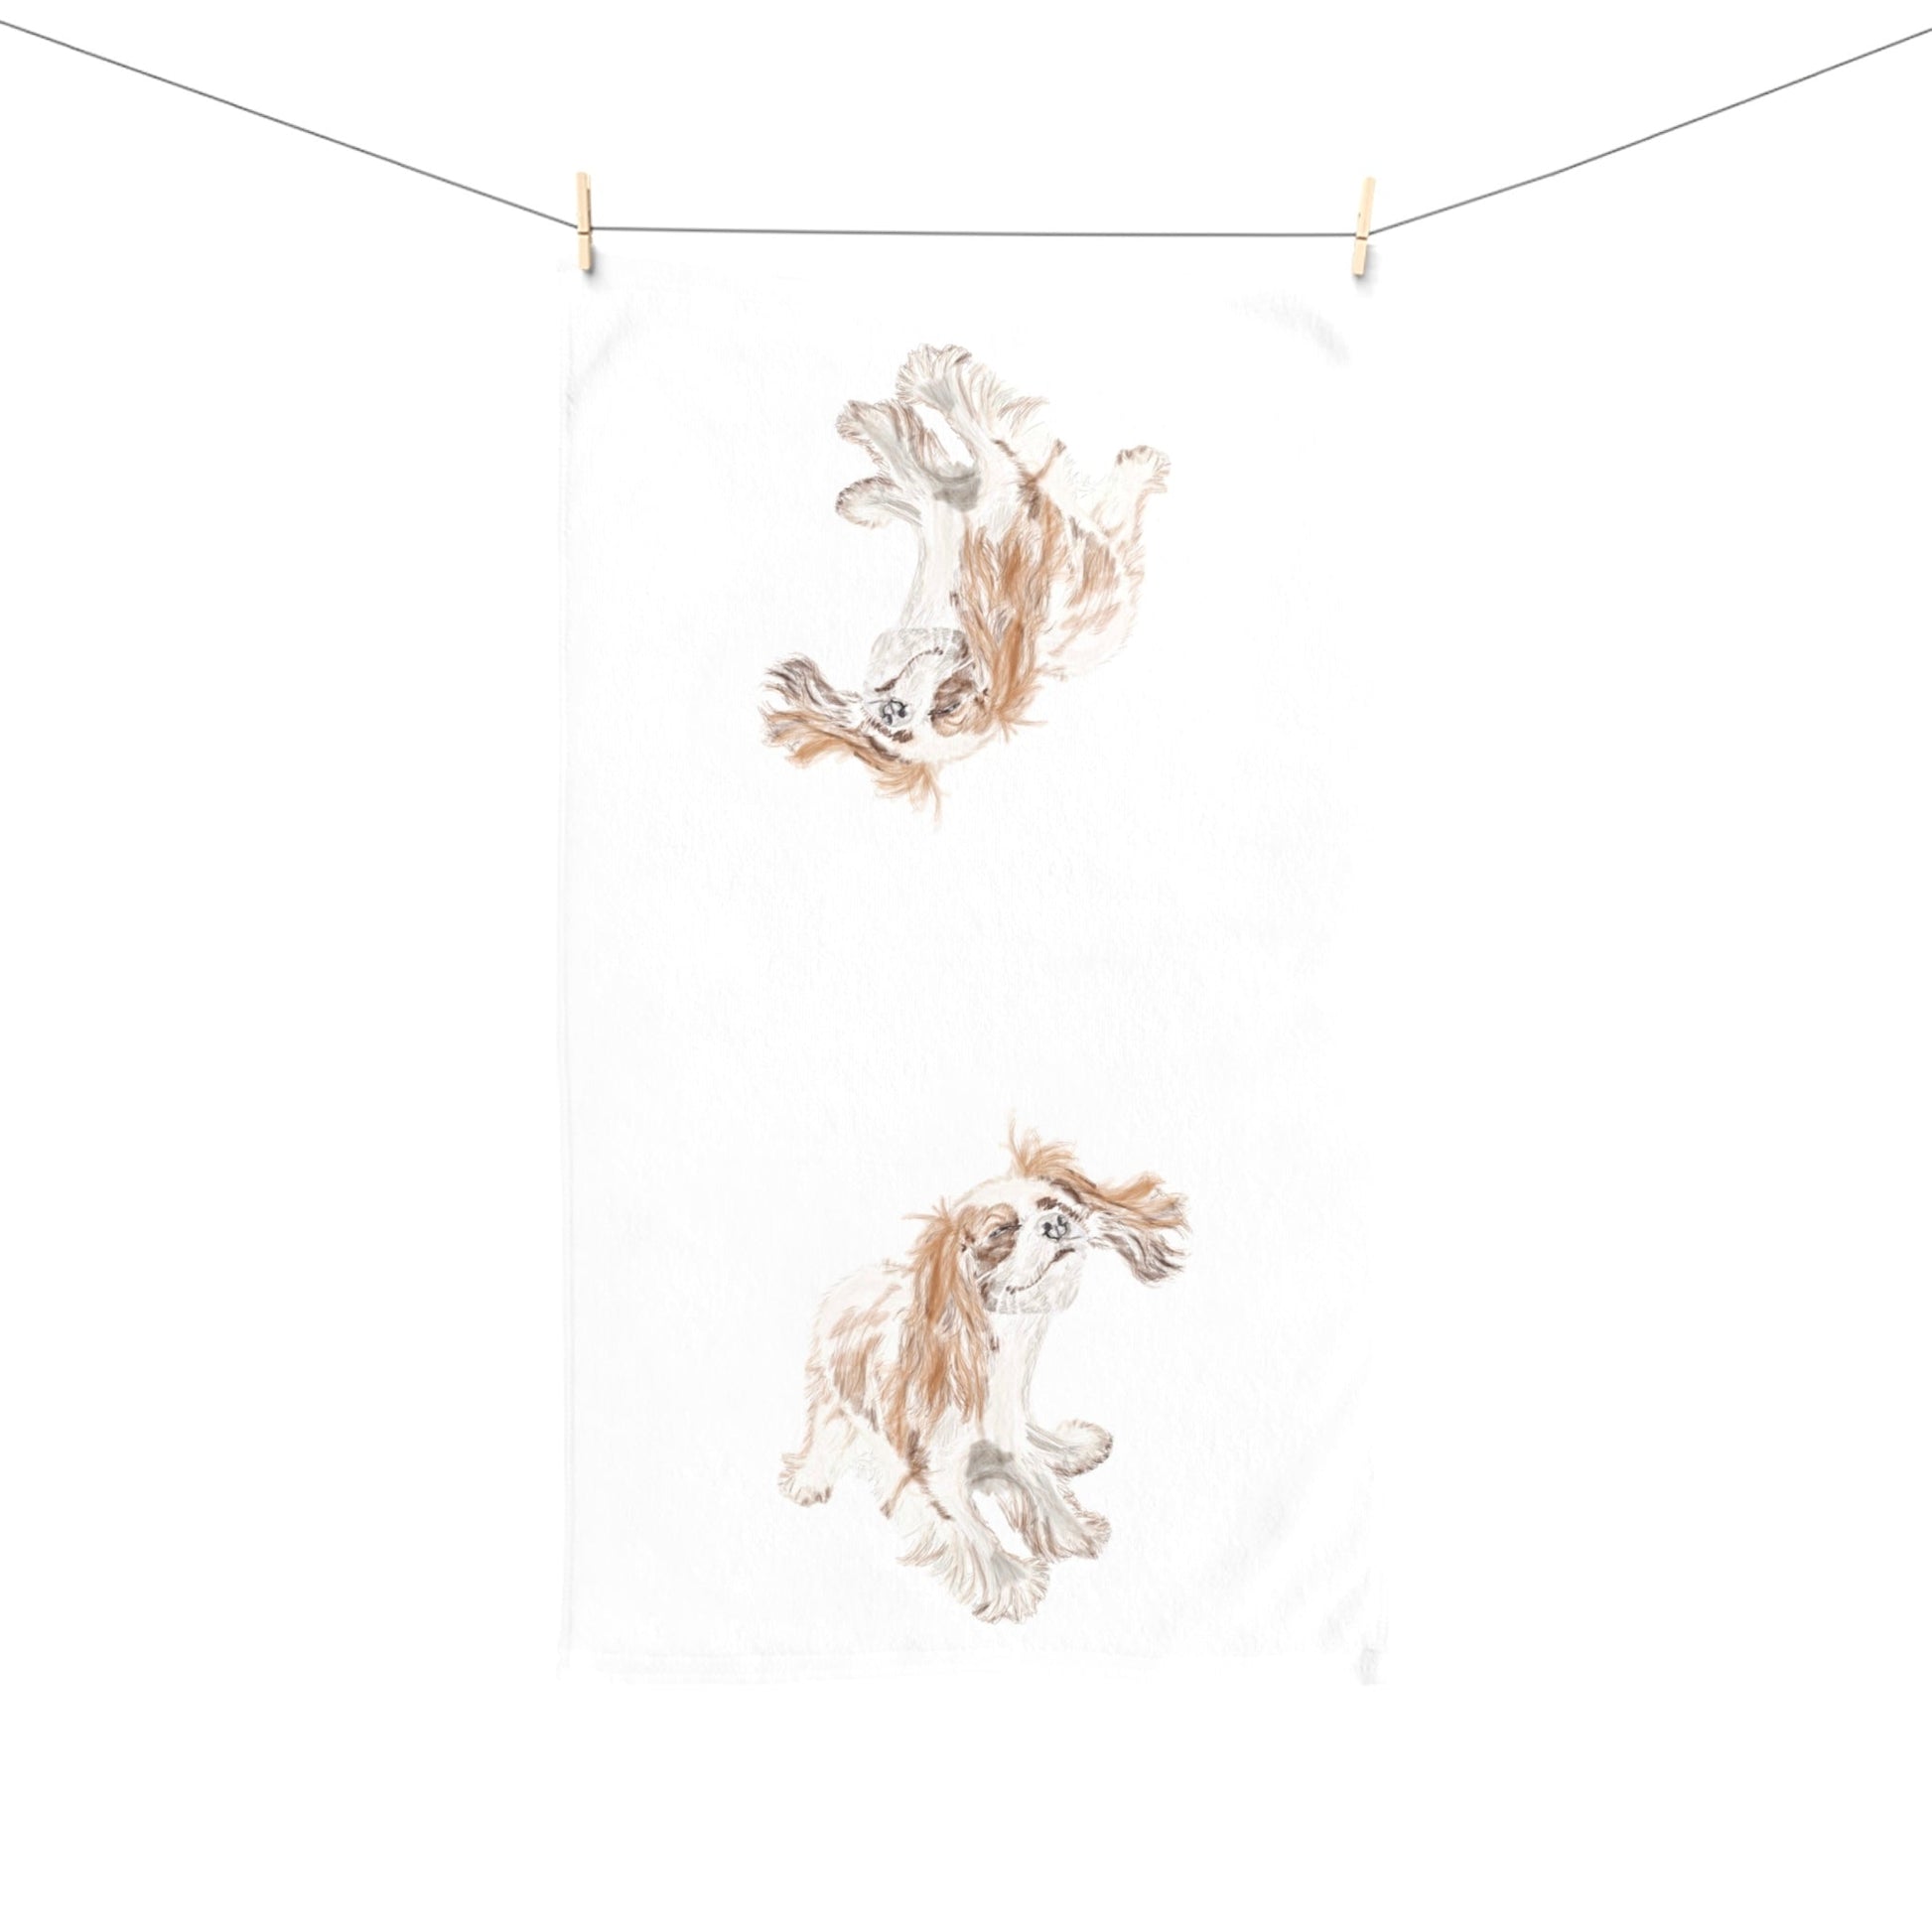 “Teddy” King Charles Puppy Hand Towel (Poly/Cotton) - Blue Cava